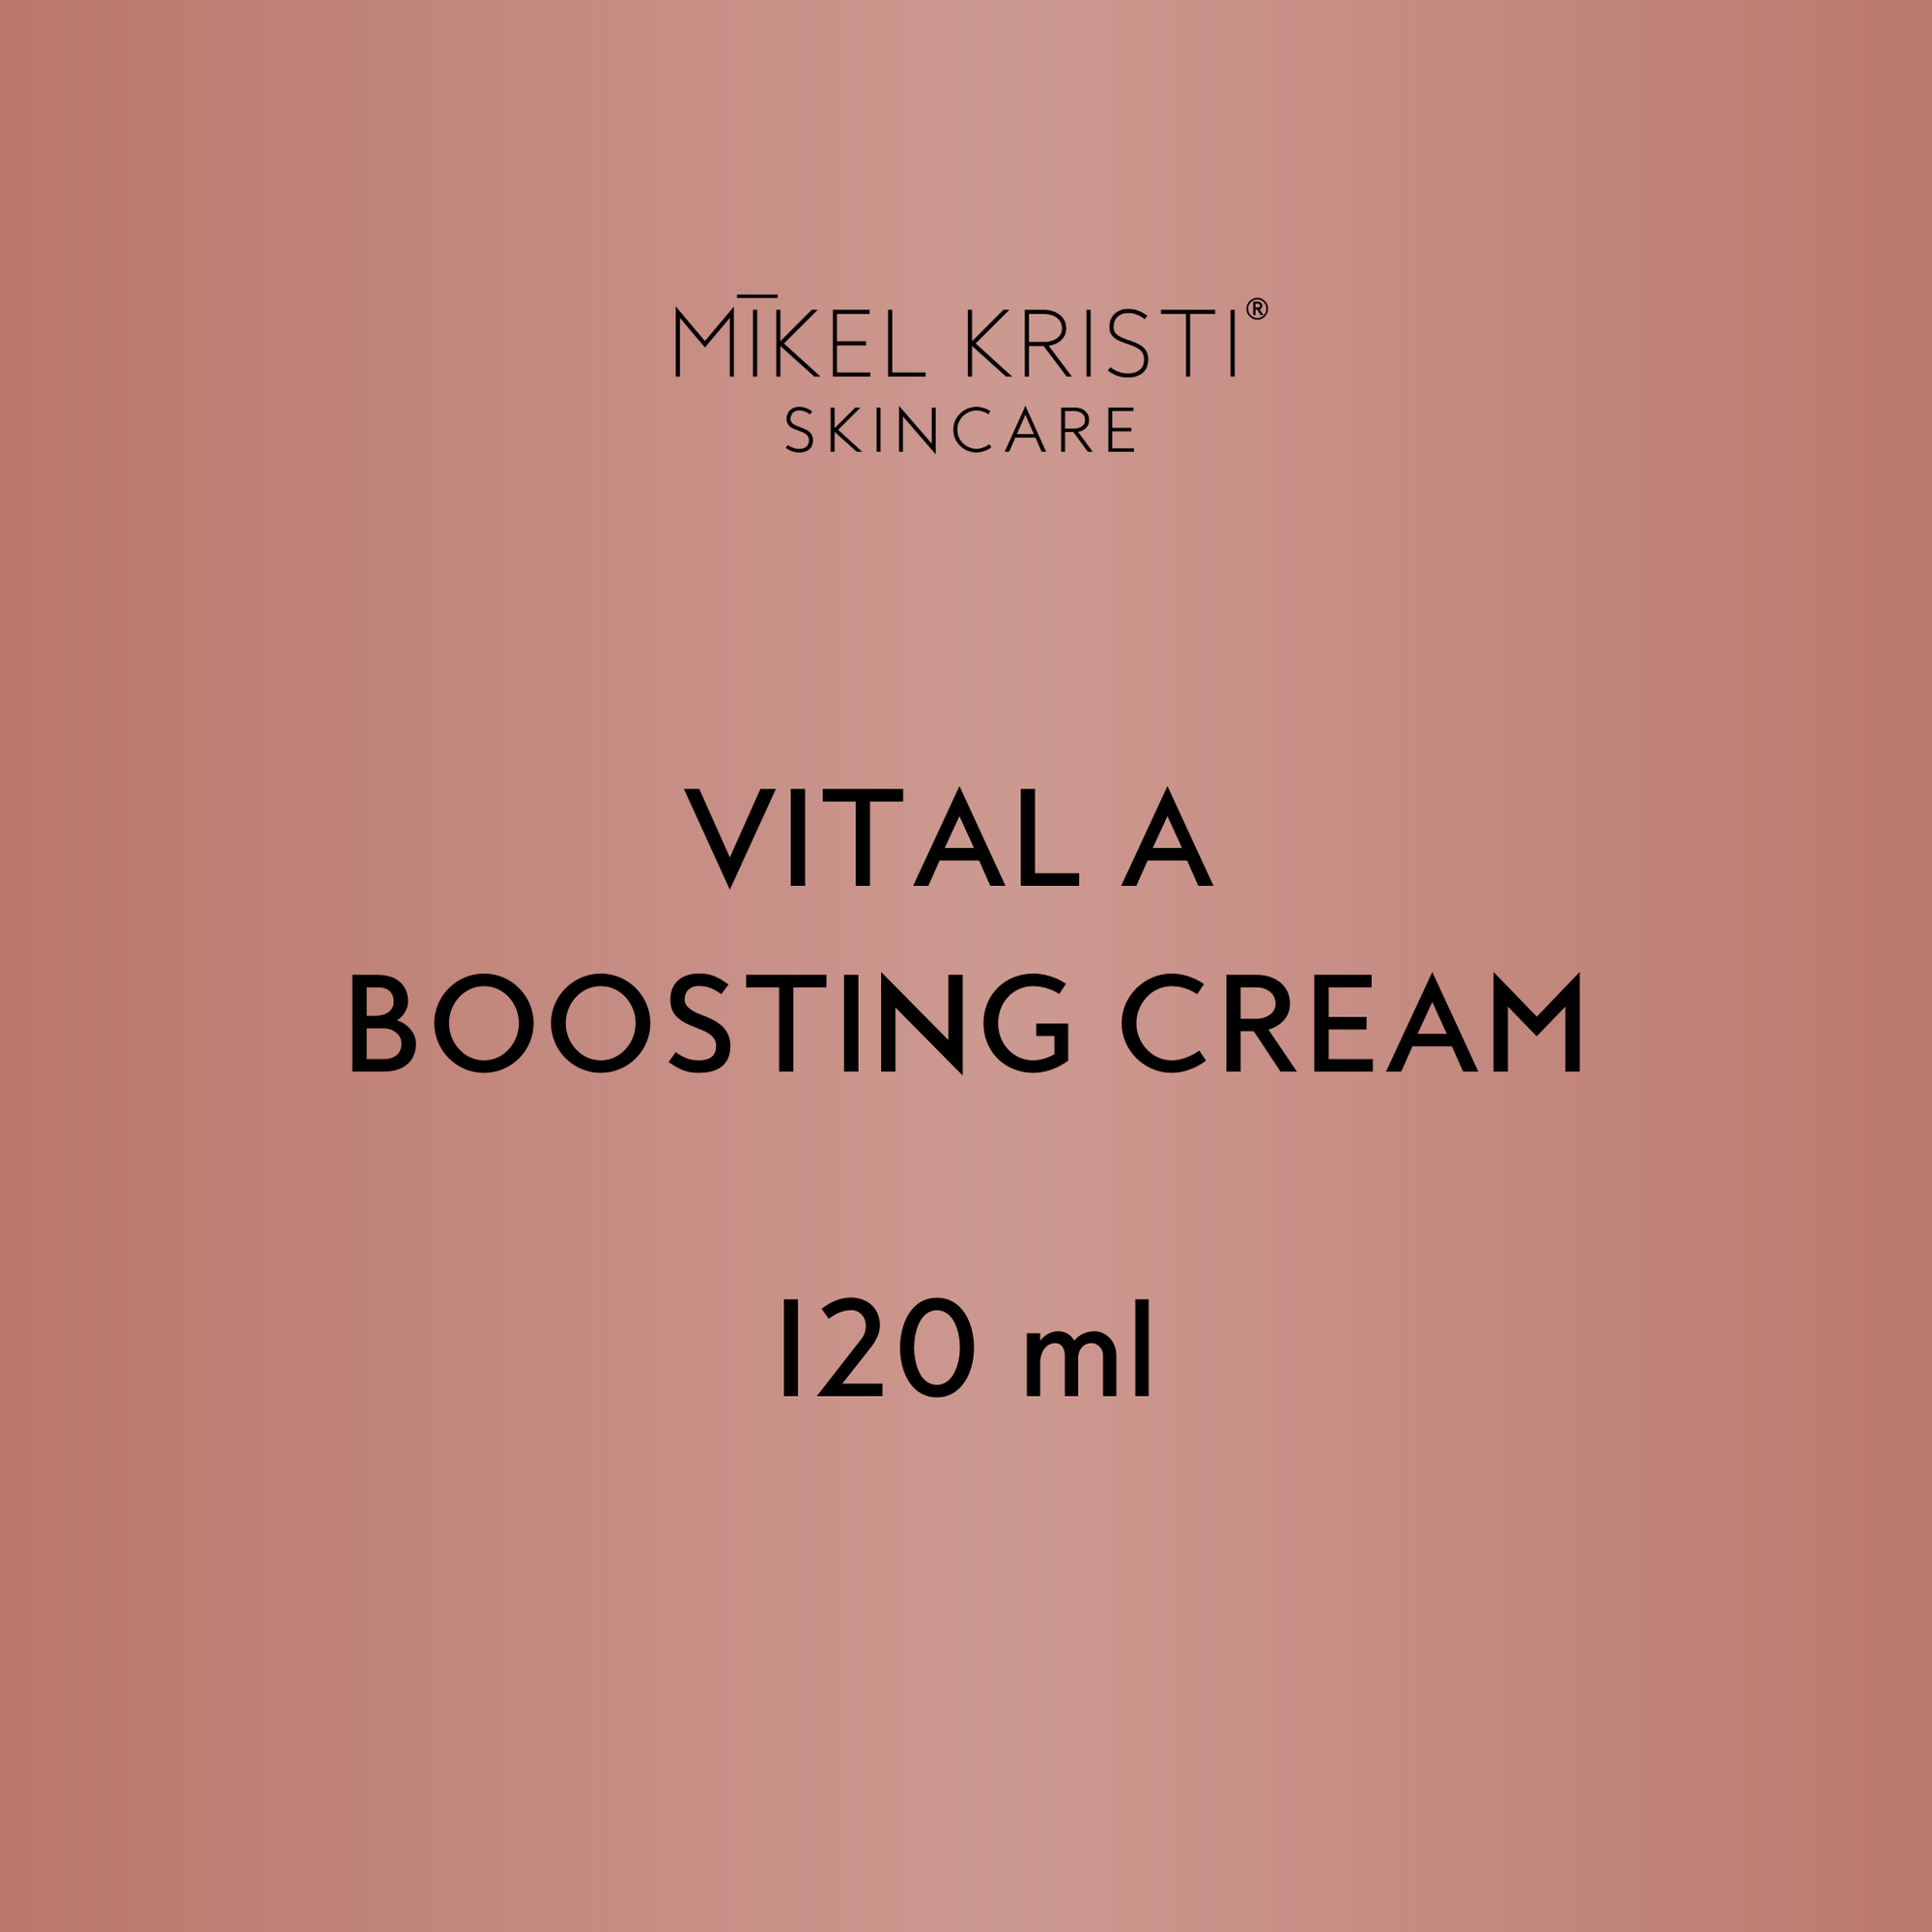 Vital A Boosting Cream is for professional use only. Please contact wholesaleinfo@mikelkristi.com for pricing, approval, or to learn more.